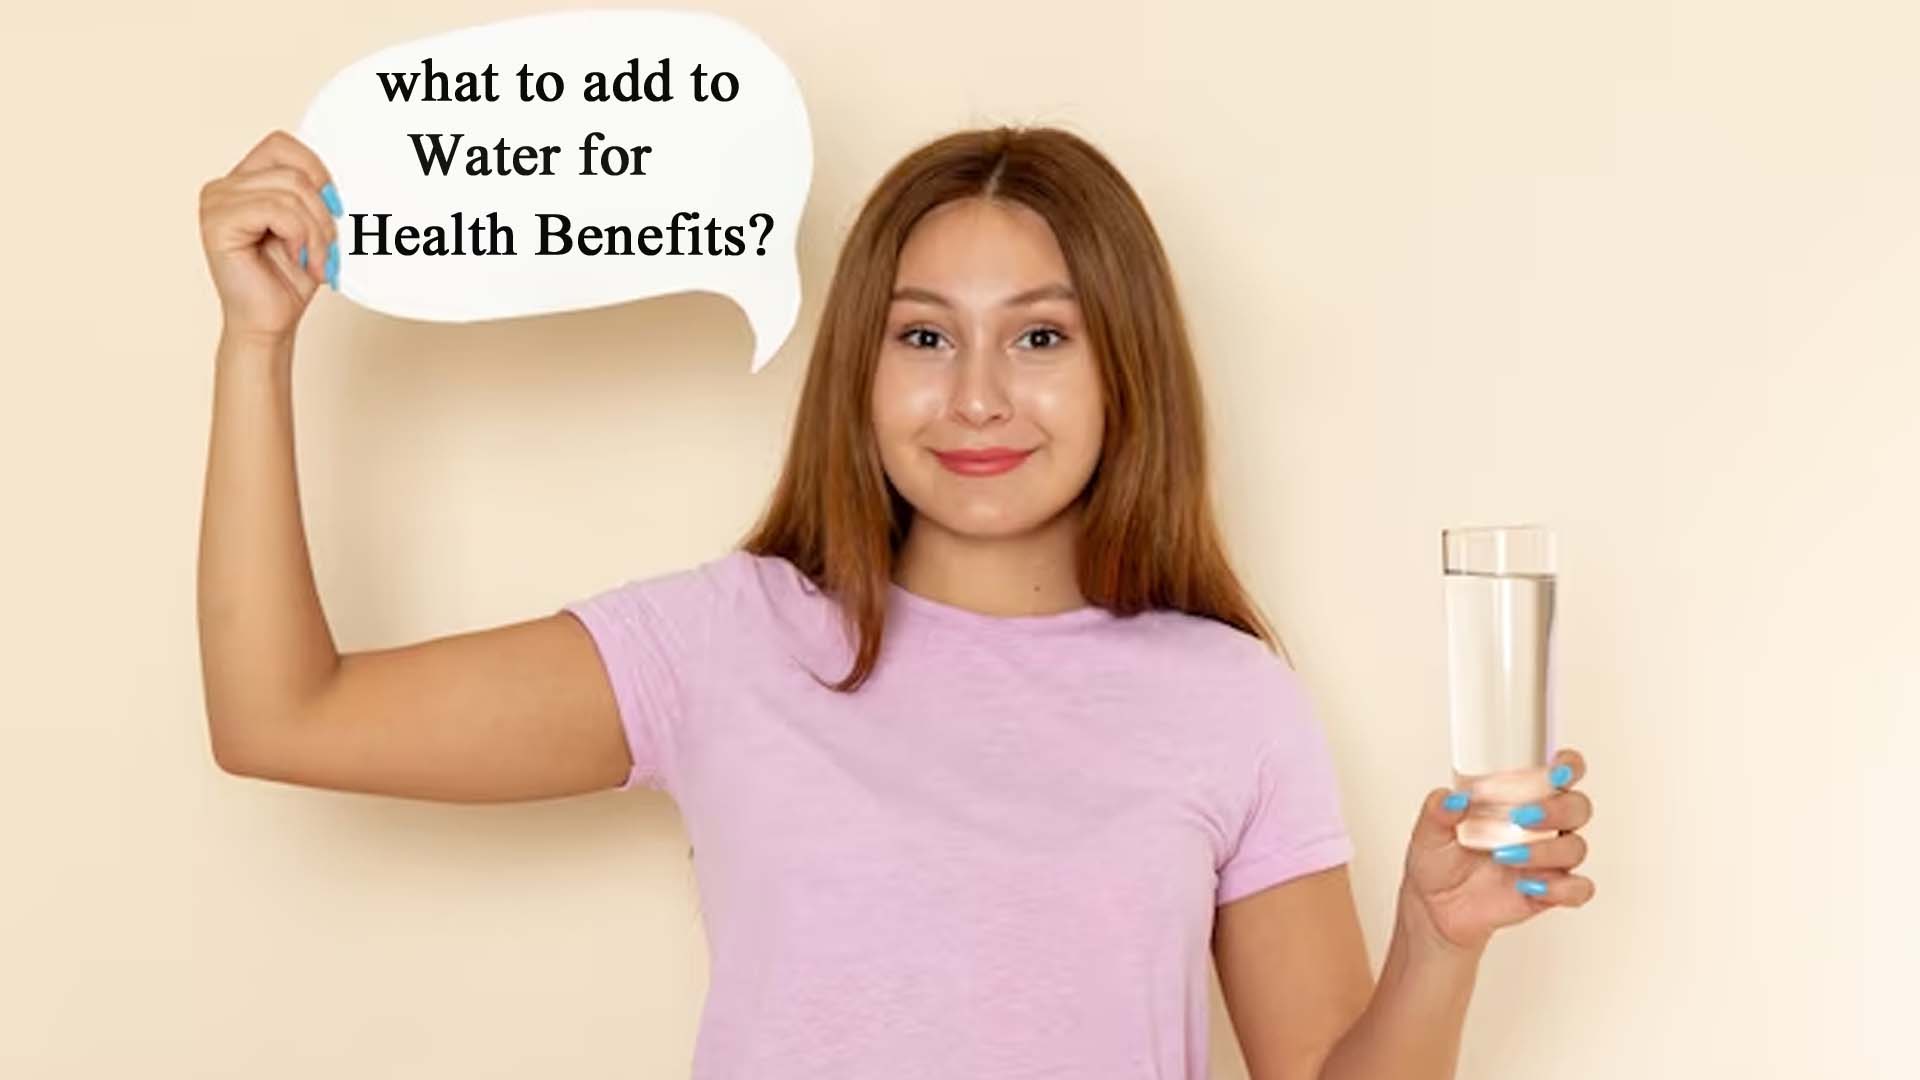 What to Add to Water for Health Benefits?